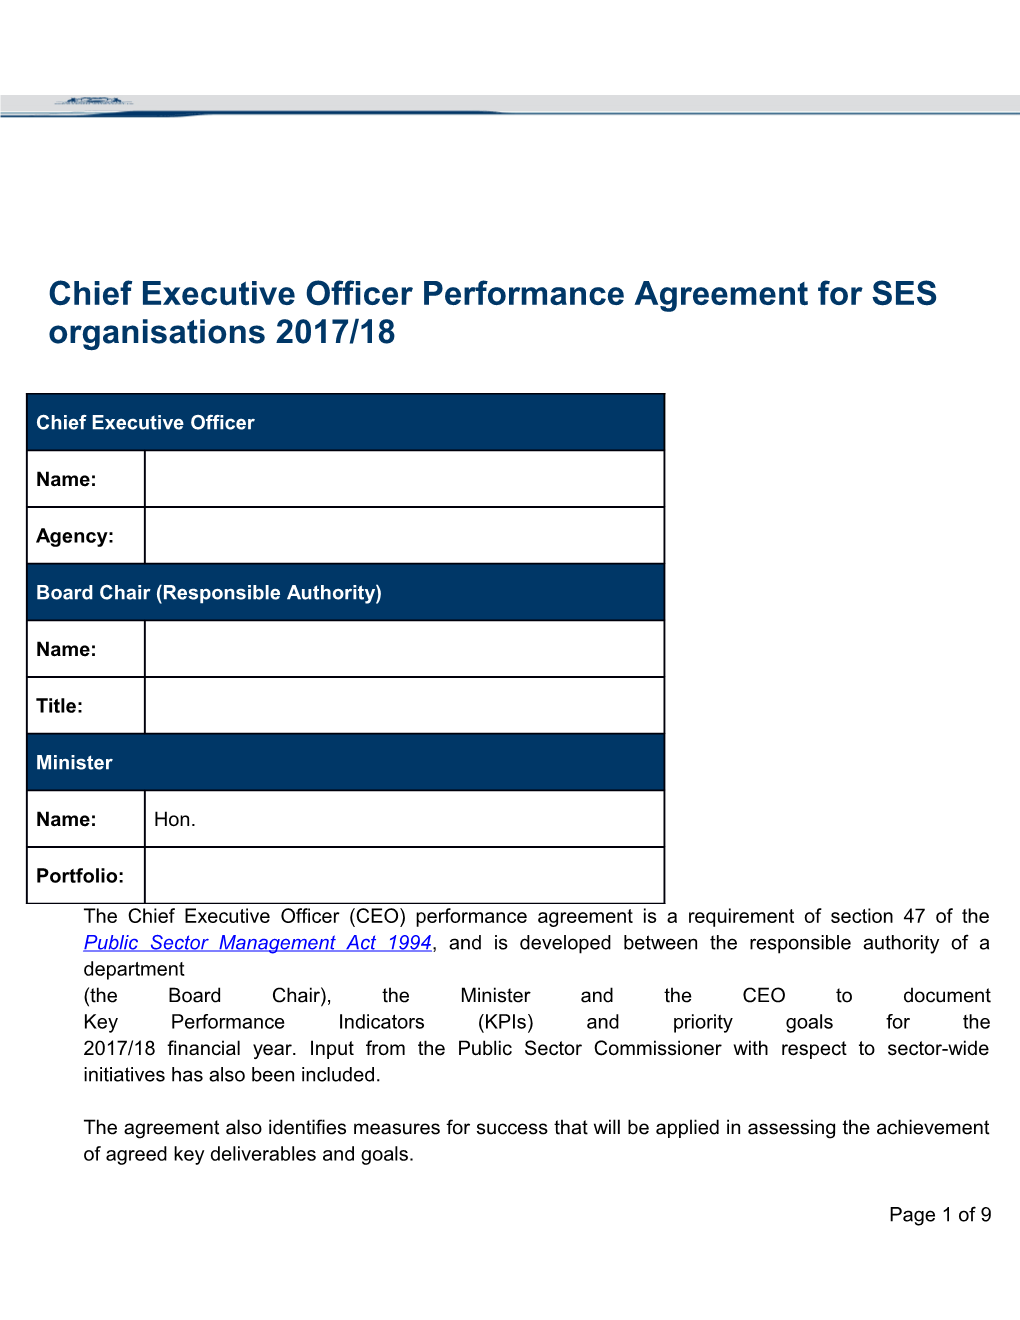 Chief Executive Officer Performance Agreement for SES Organisations 2017/18